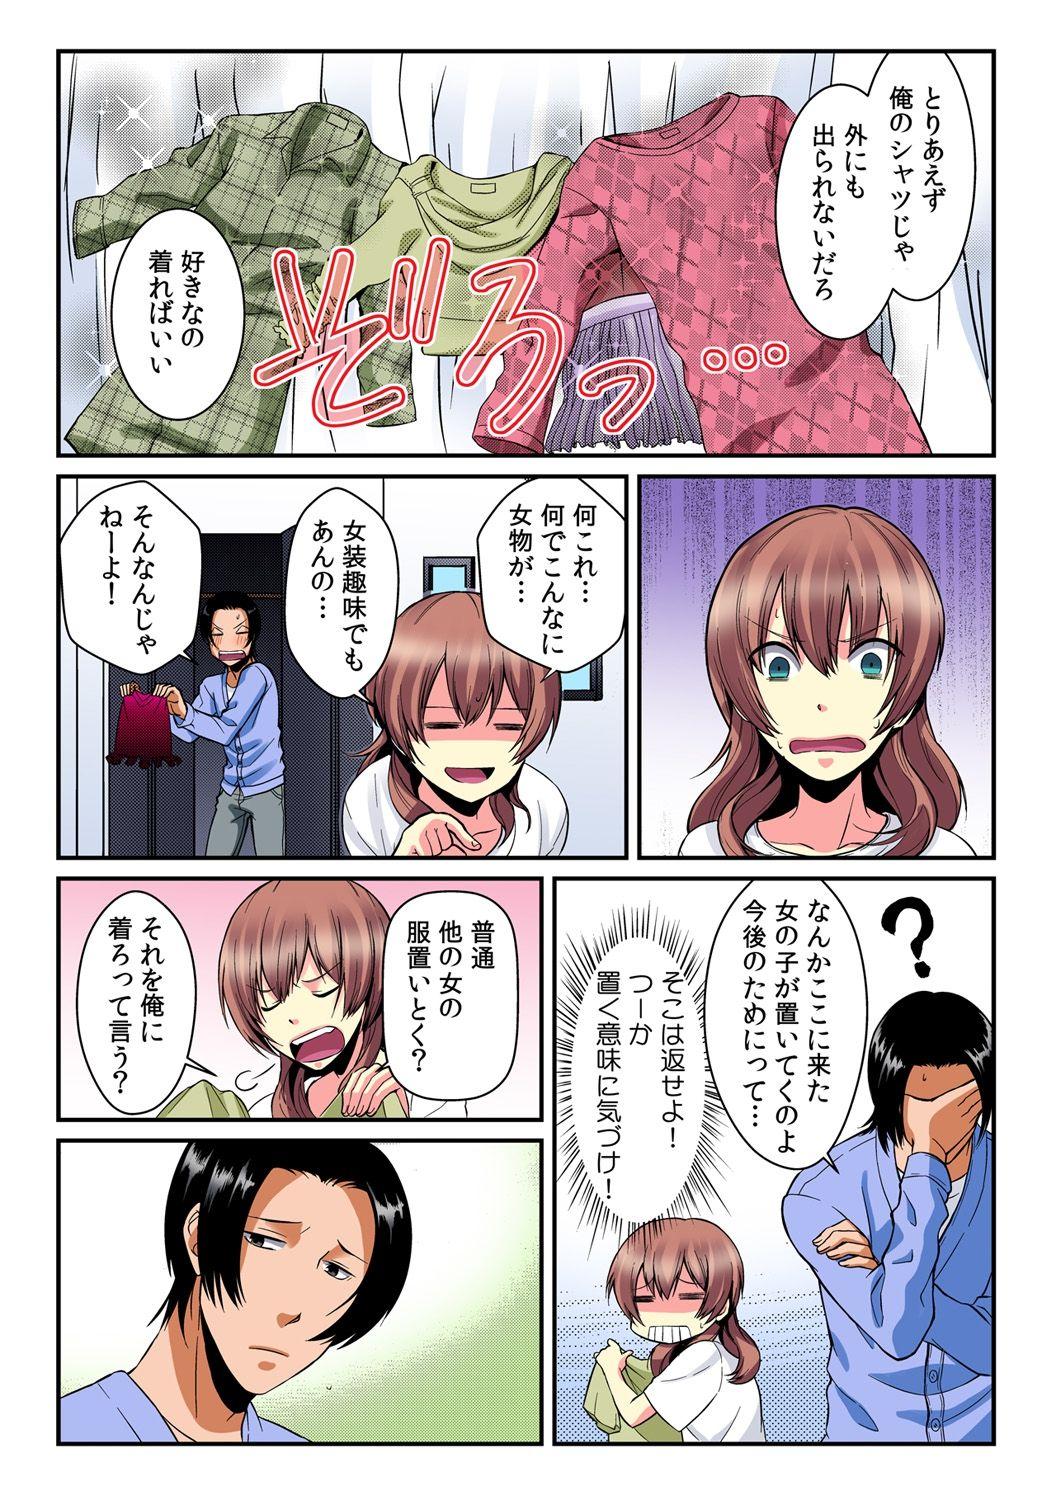 [Akagi Gijou / Akahige] I became a girl- and I definitely can't let anyone find out! (Full color) 2 4